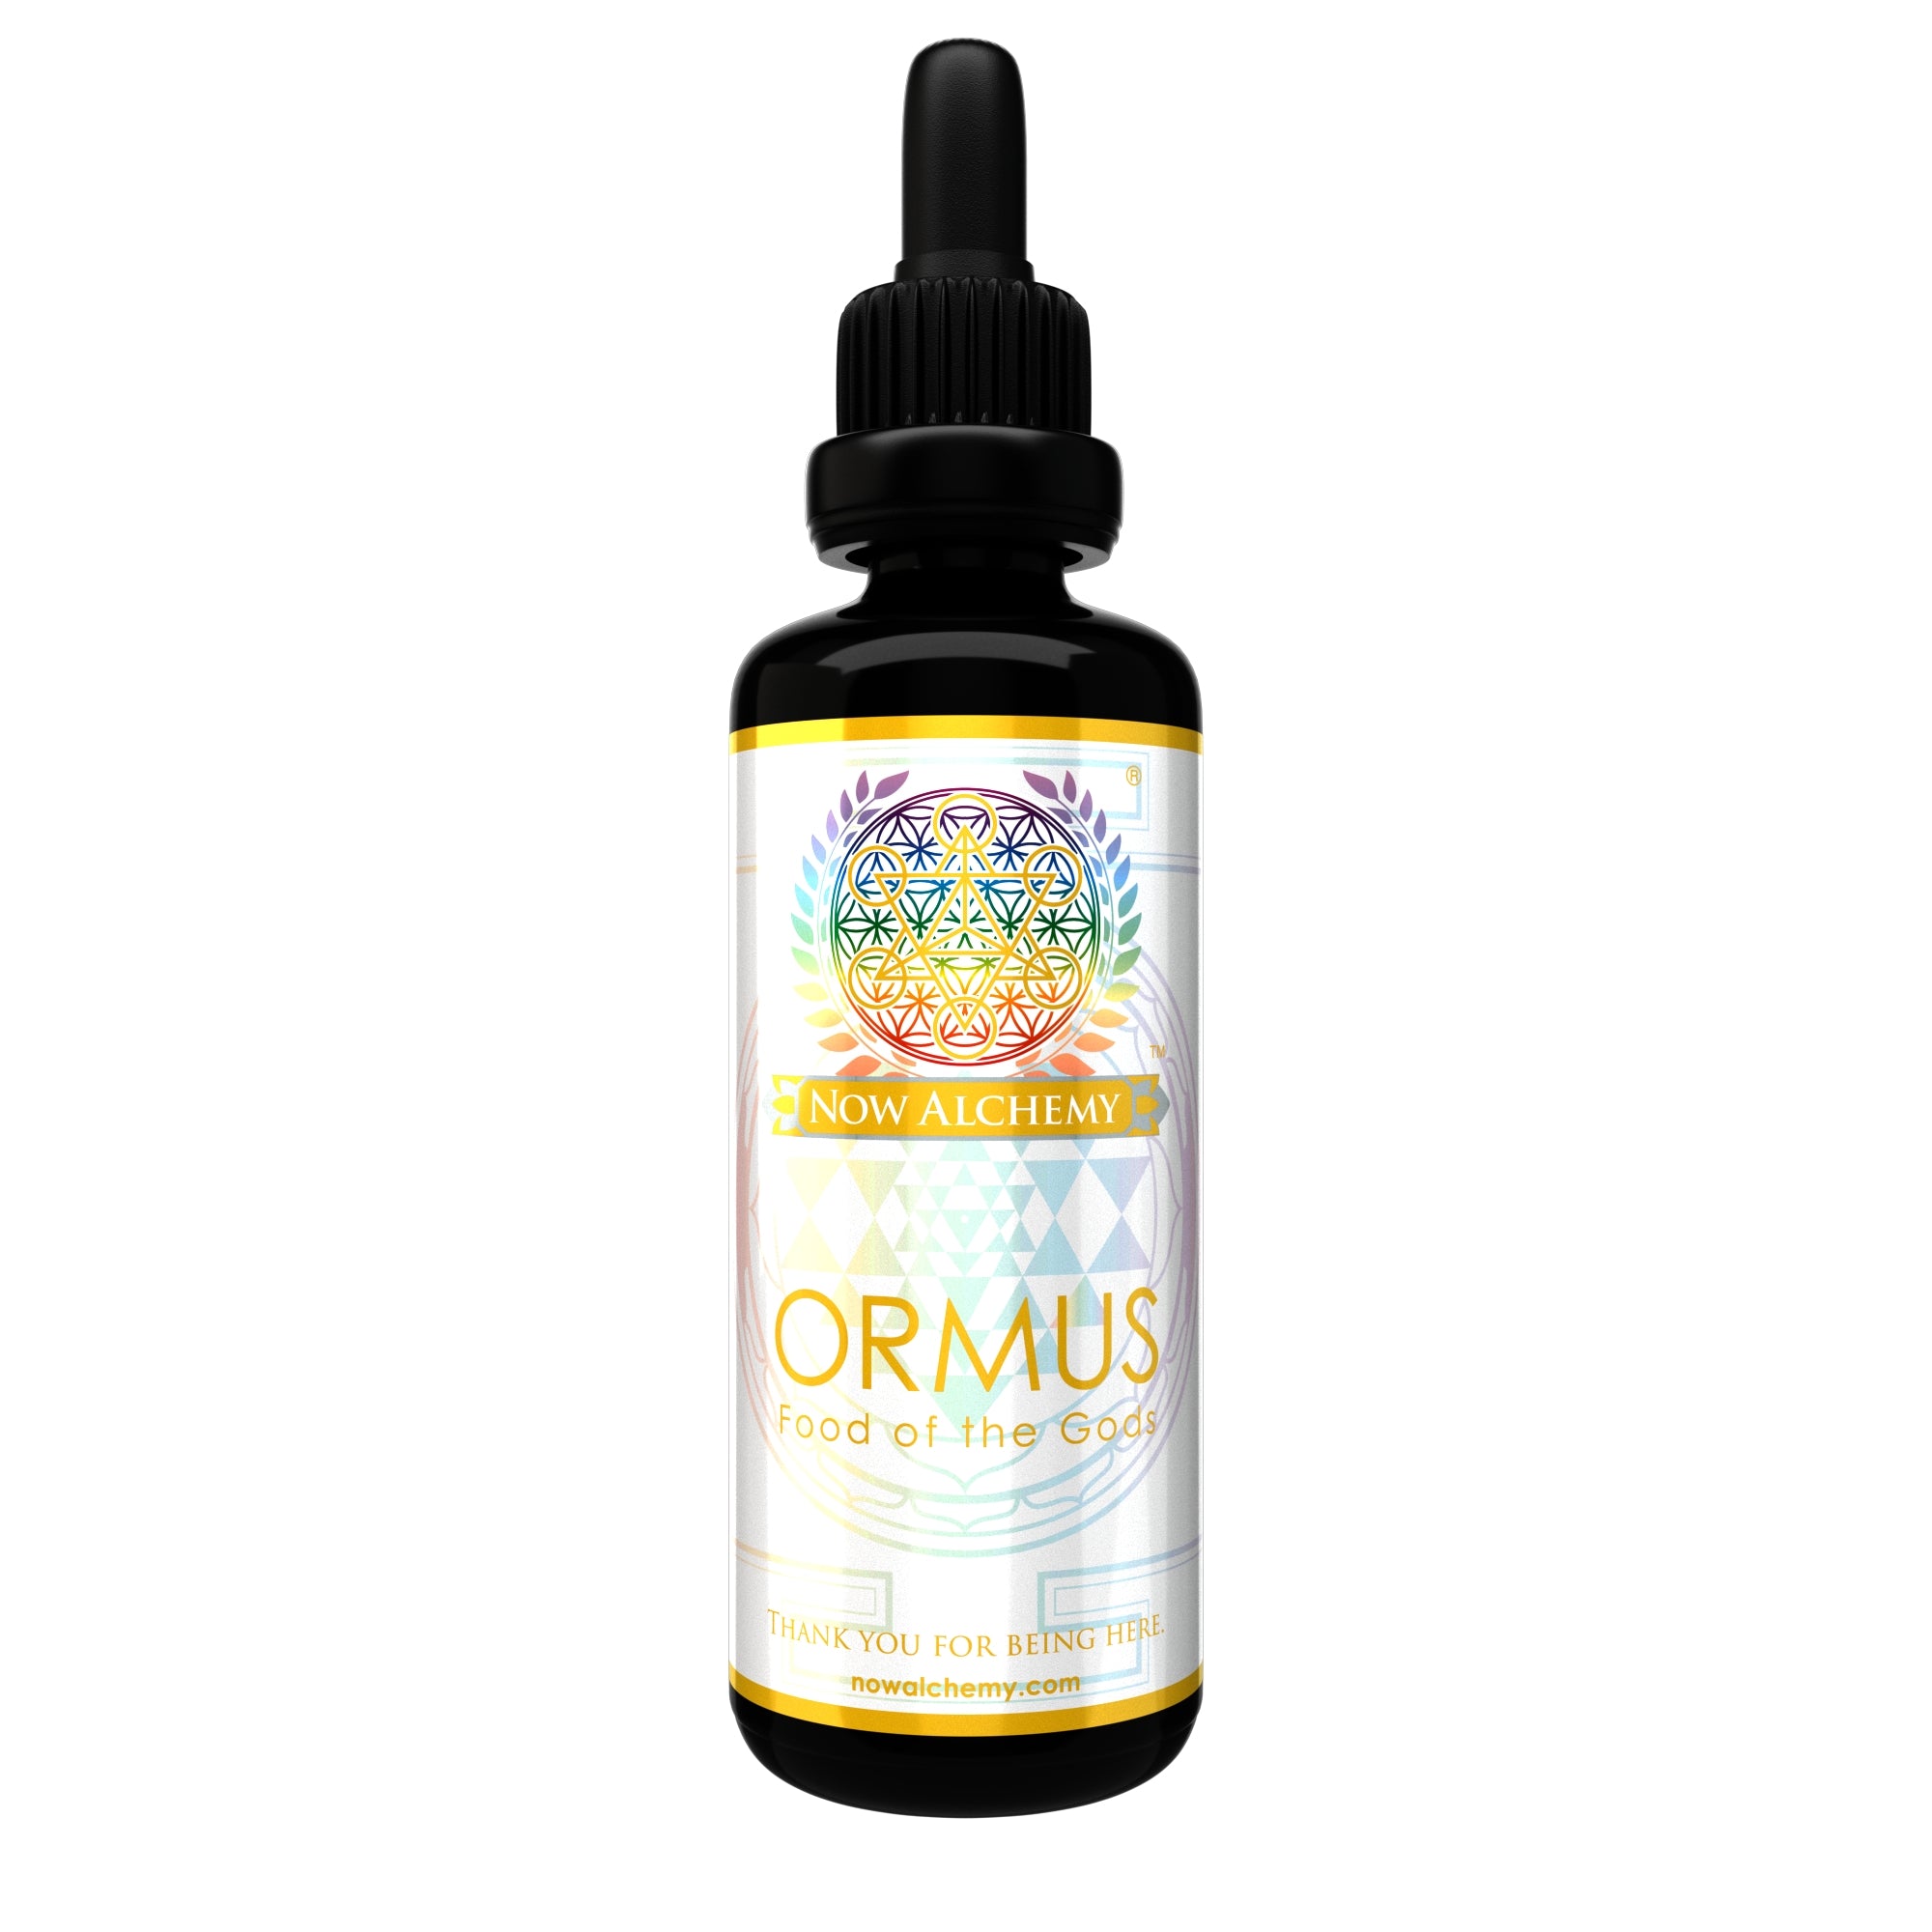 Ormus products